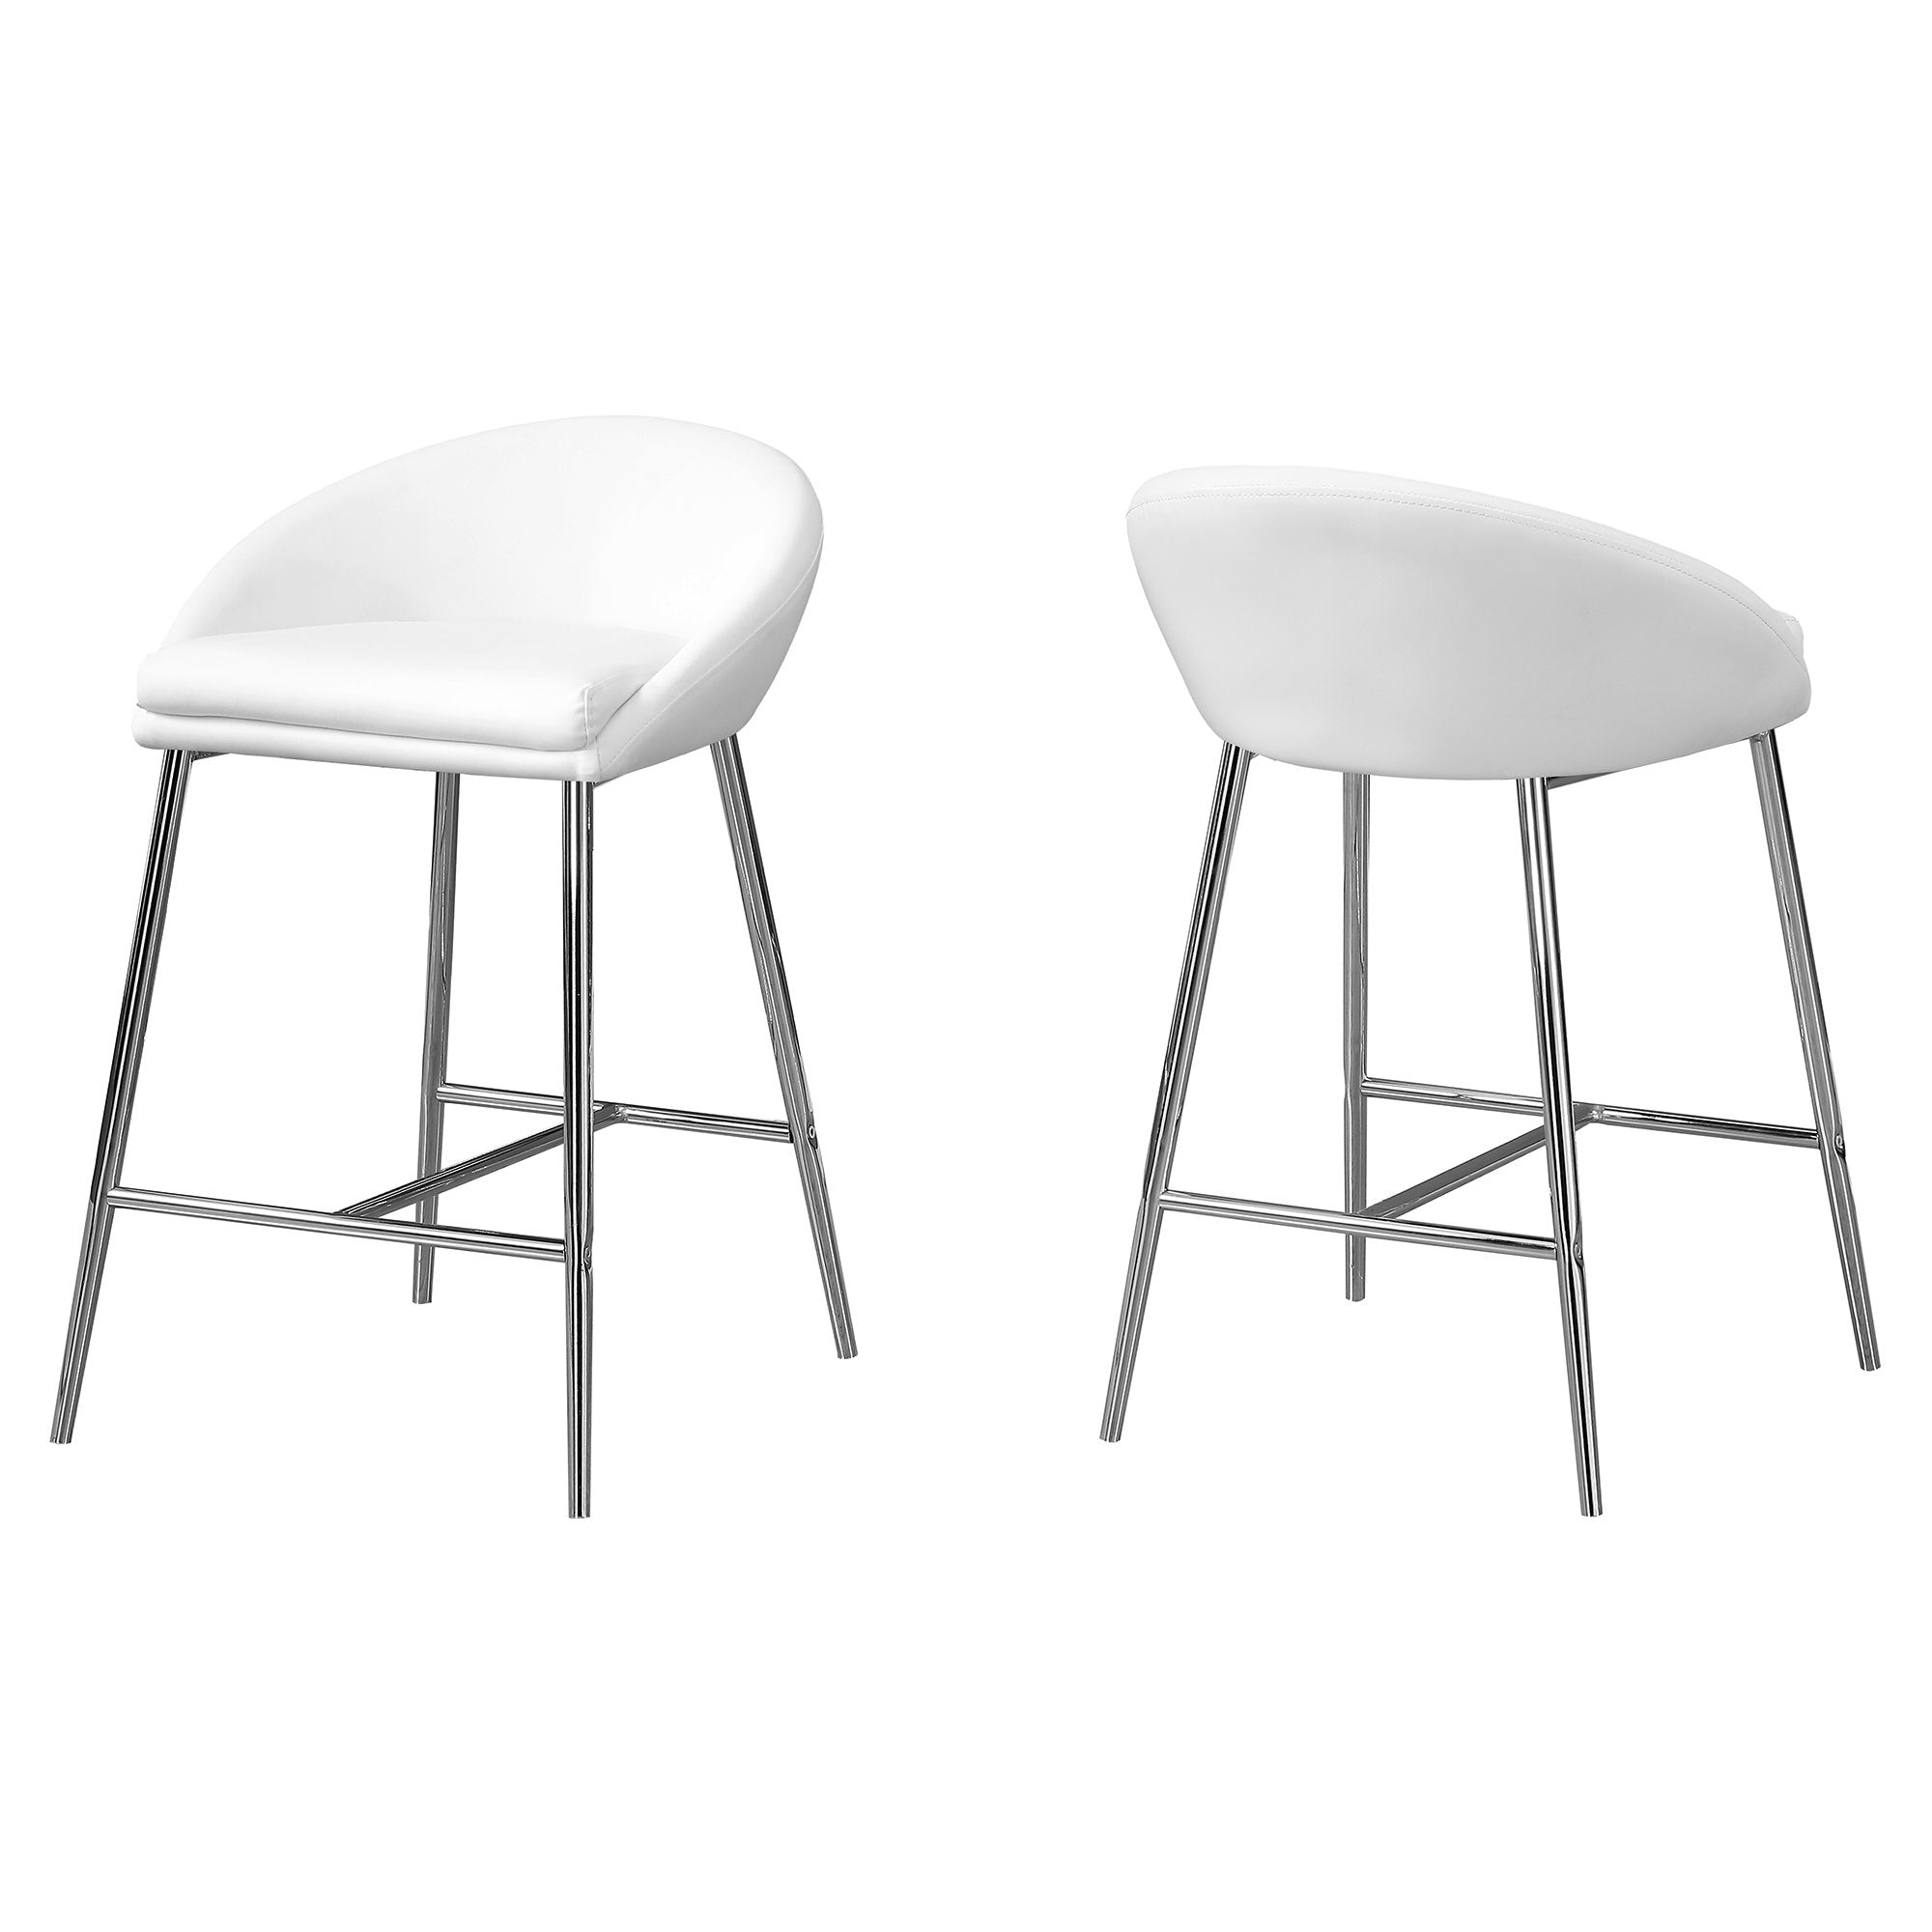 MN-682296    Bar Stool, Set Of 2, Counter Height, Kitchen, Metal, Leather Look, White, Chrome, Contemporary, Modern